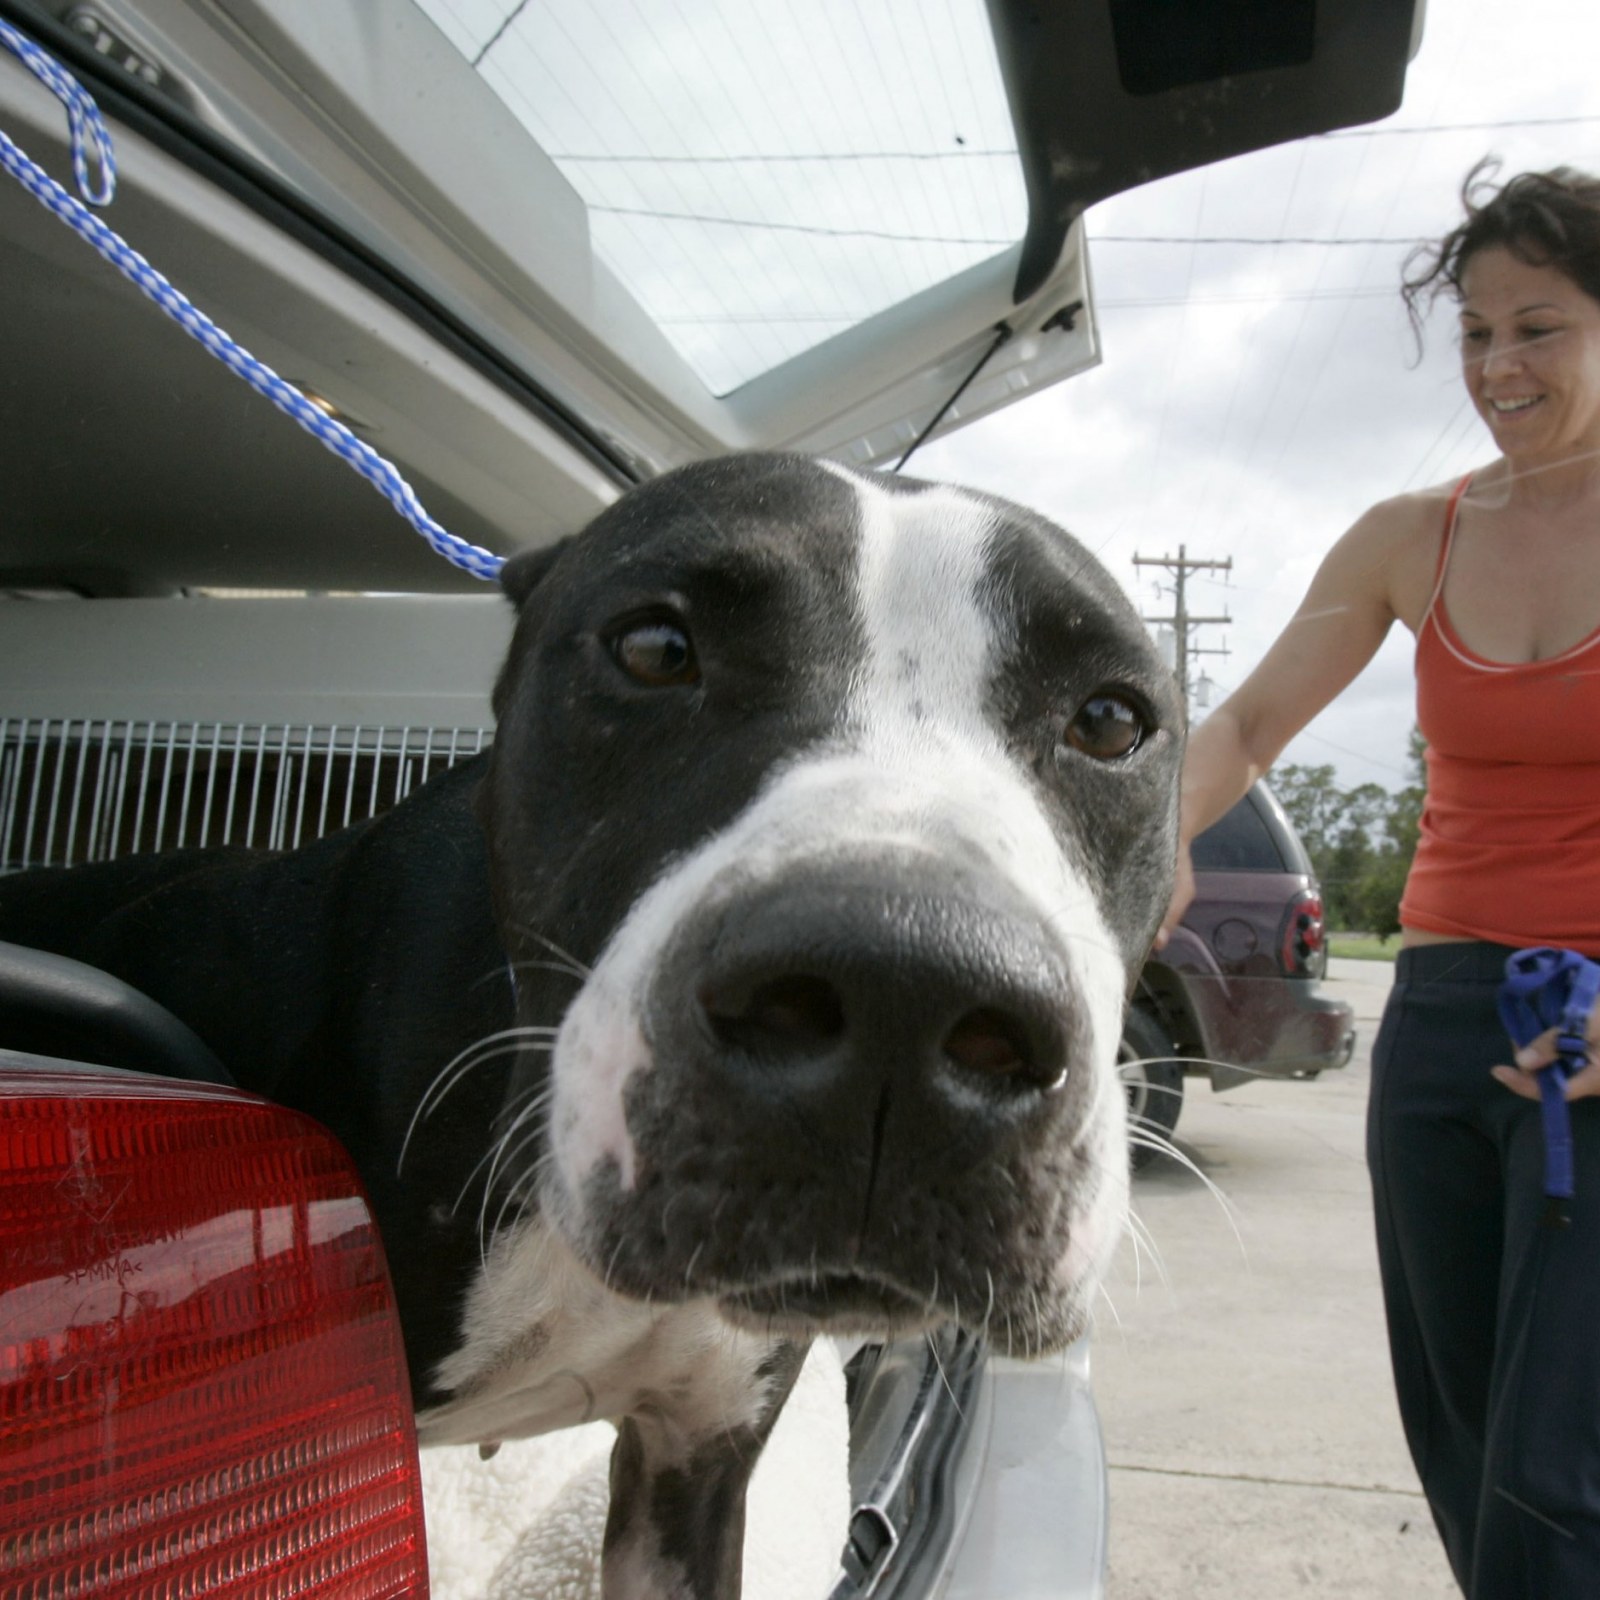 Labeling Dogs Pit Bulls Keeps Them In Shelters Study Images, Photos, Reviews